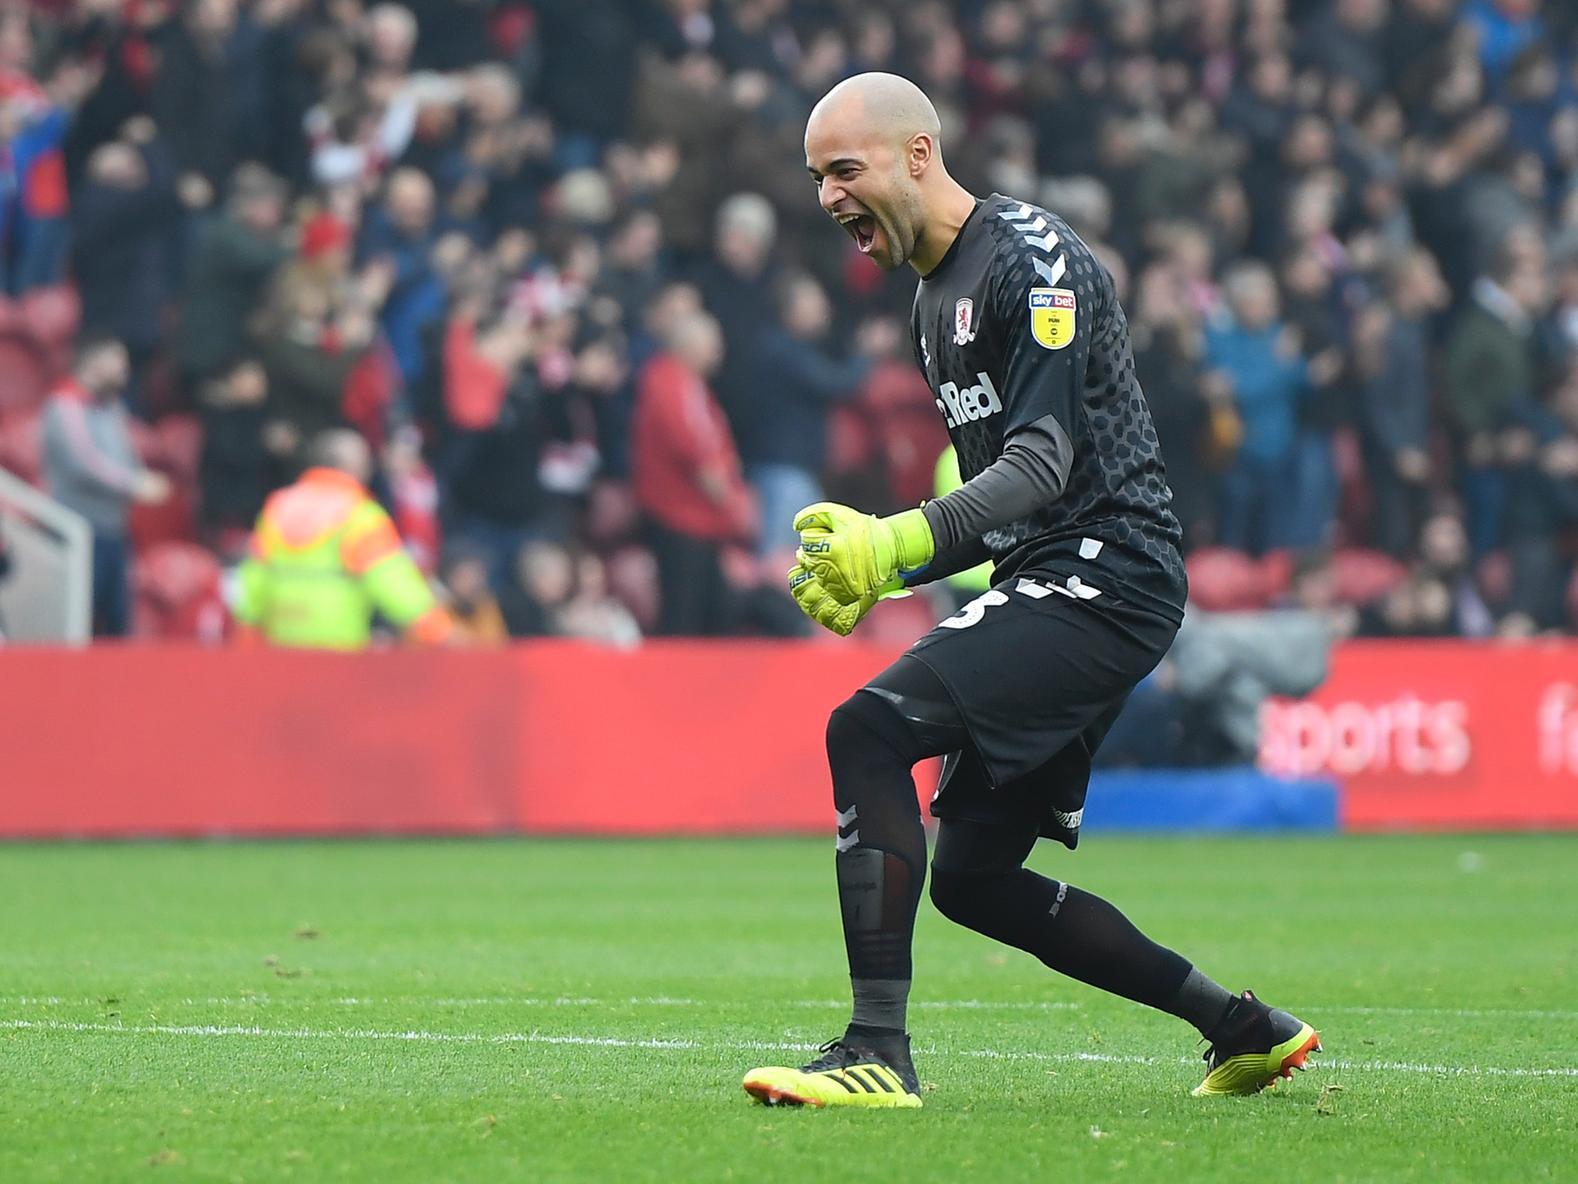 Middlesbrough have rejected an offer for Republic of Ireland goalkeeper Darren Randolph from Premier League club West Ham as new boss David Moyes looks to strengthen their options in goal. (Sky Sports)